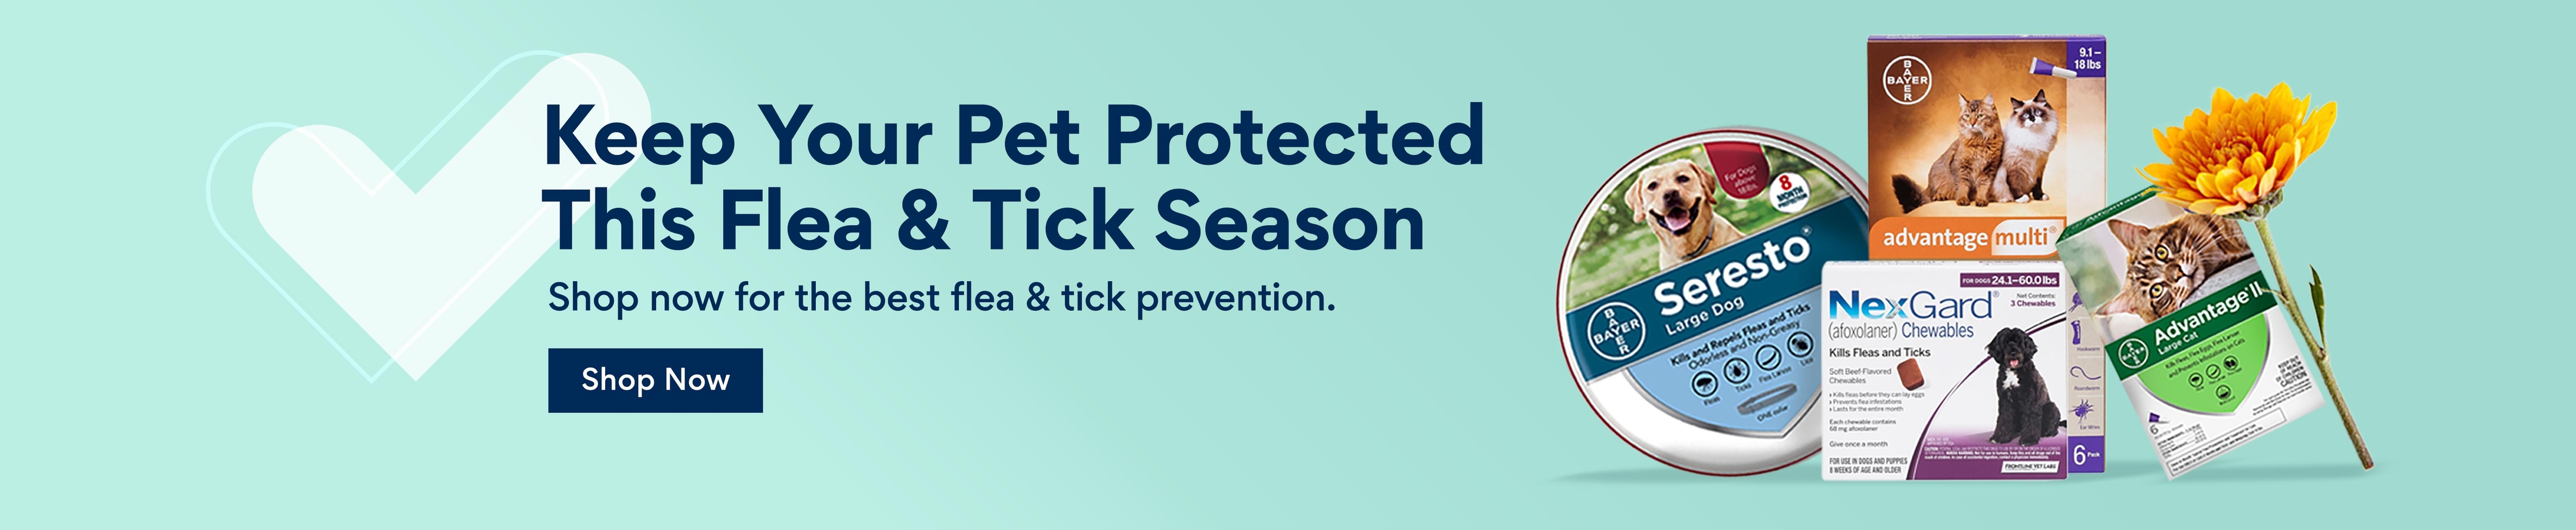 keep your pet protected this flea & tick season. shop now for the best flea & tick prevention